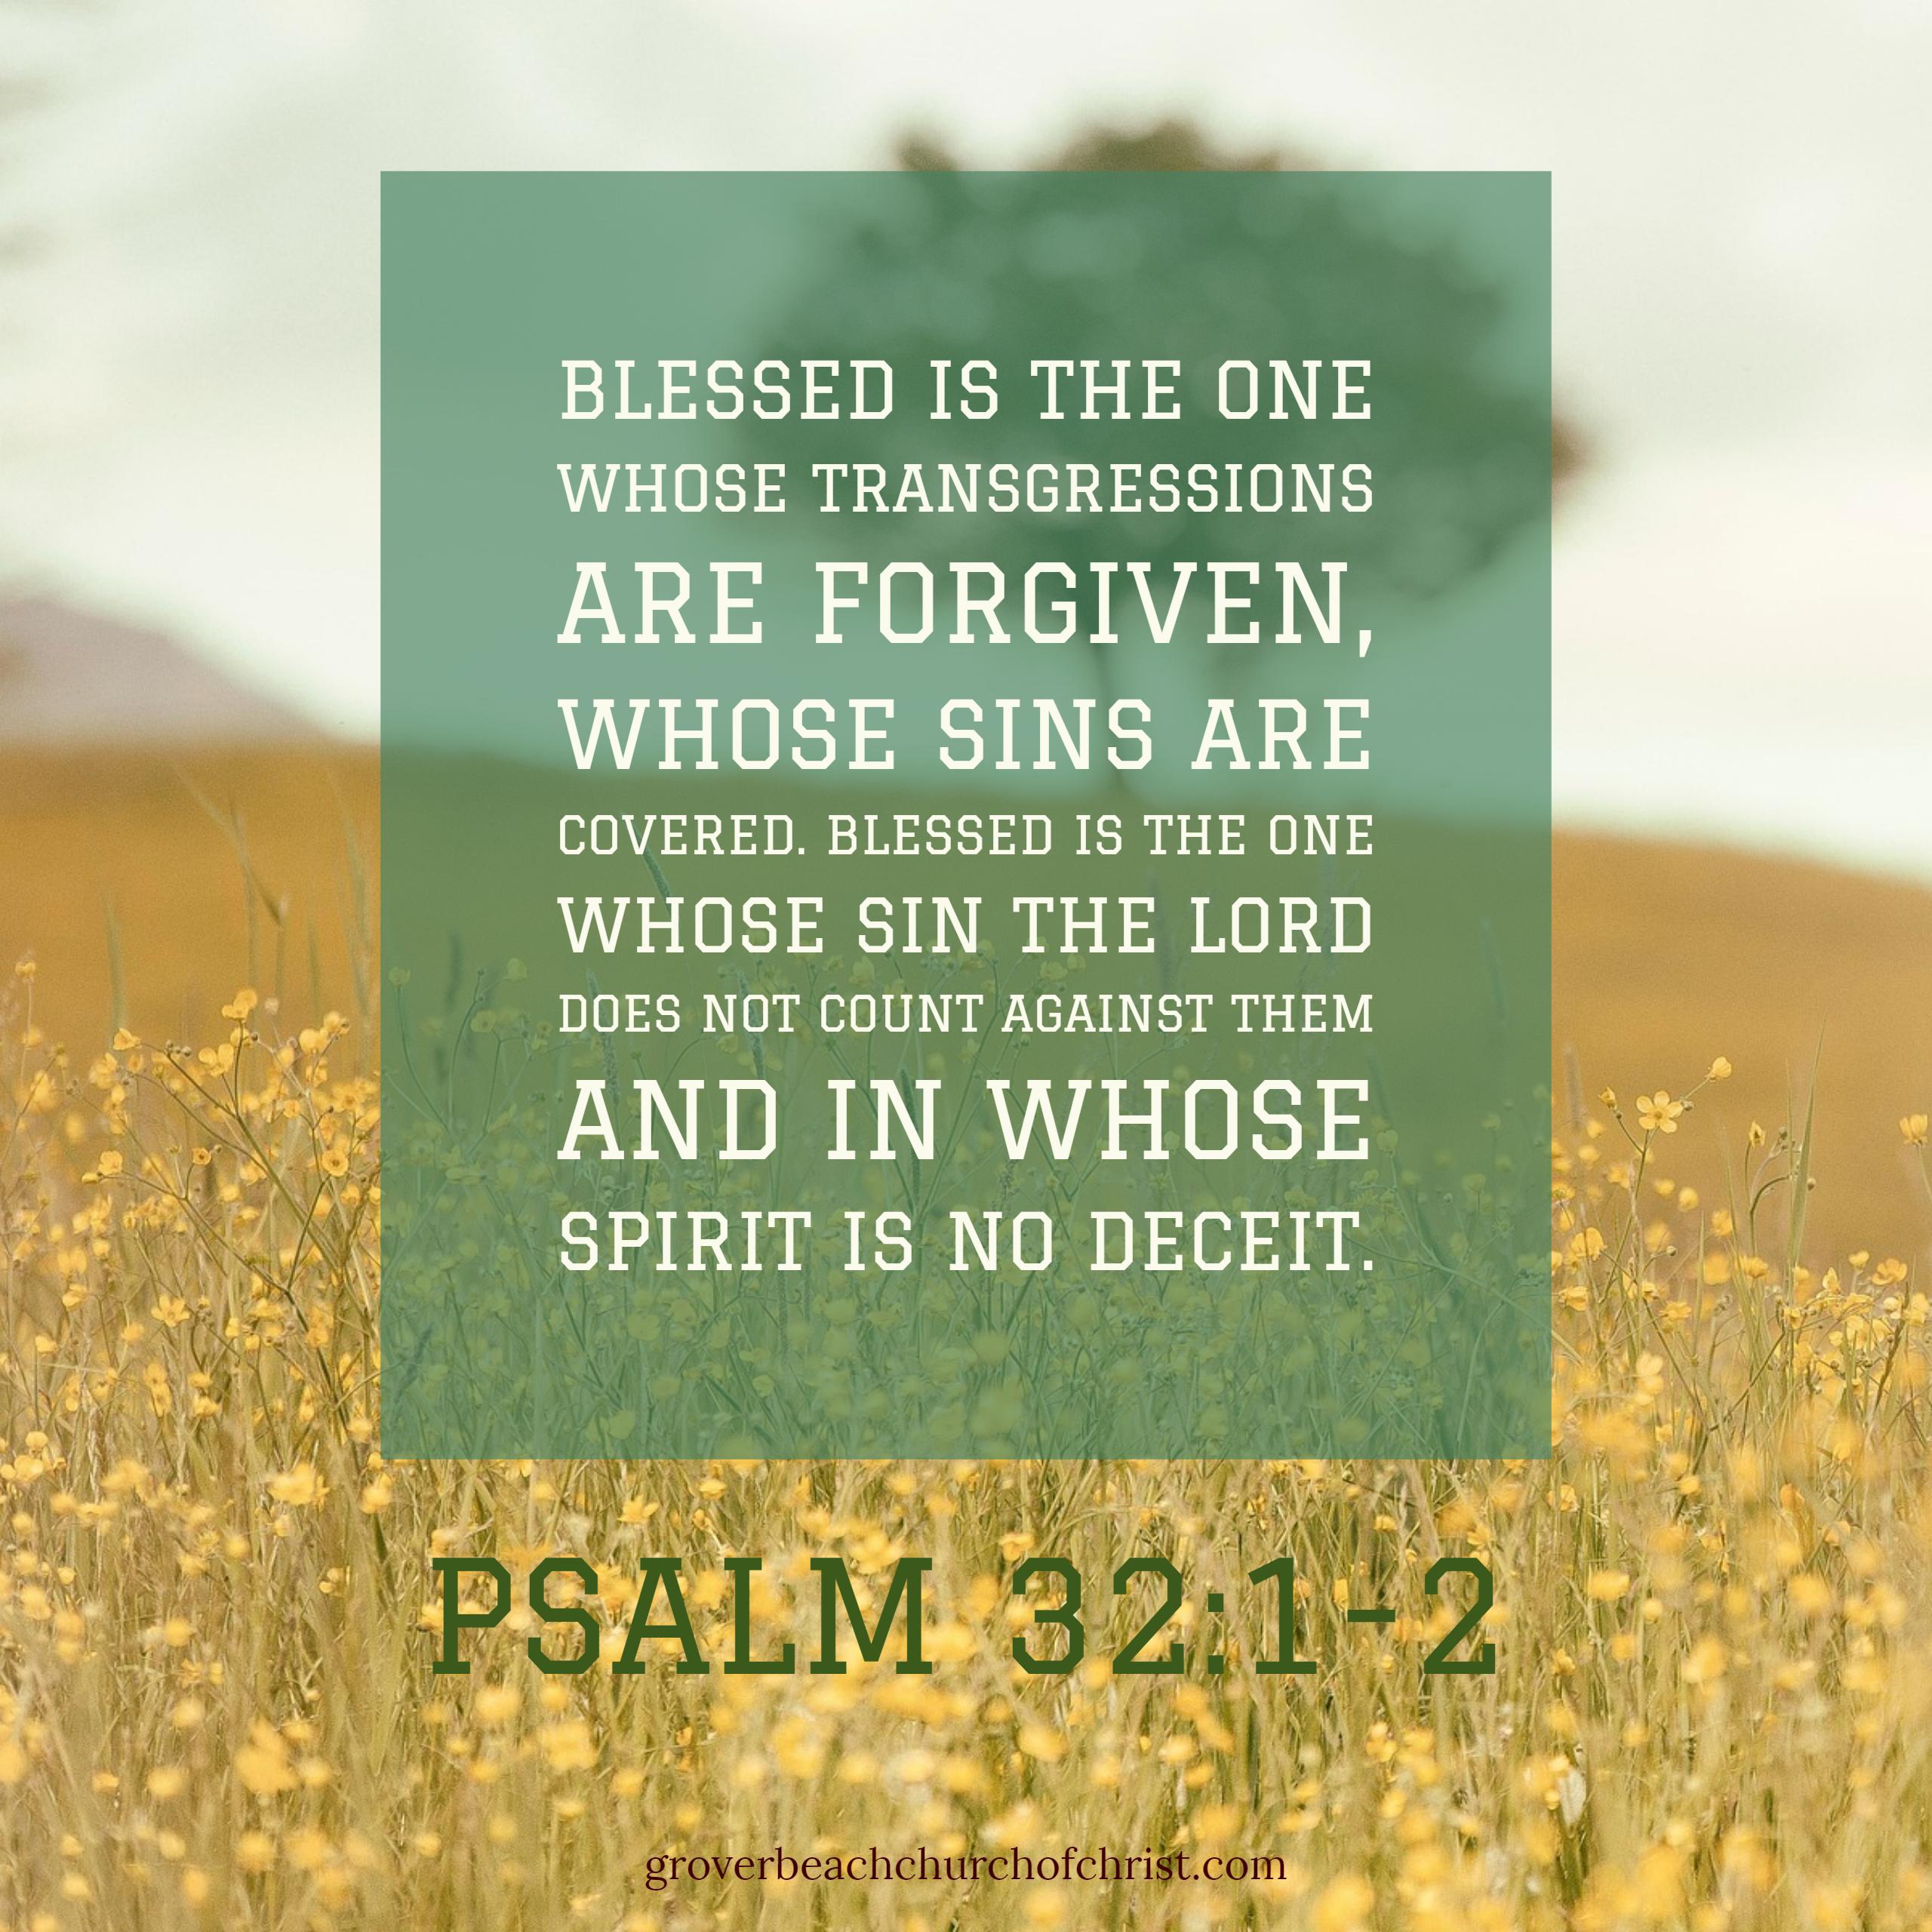 proverbs-32:1-2-blessed-is-the-one-whose-transgressions